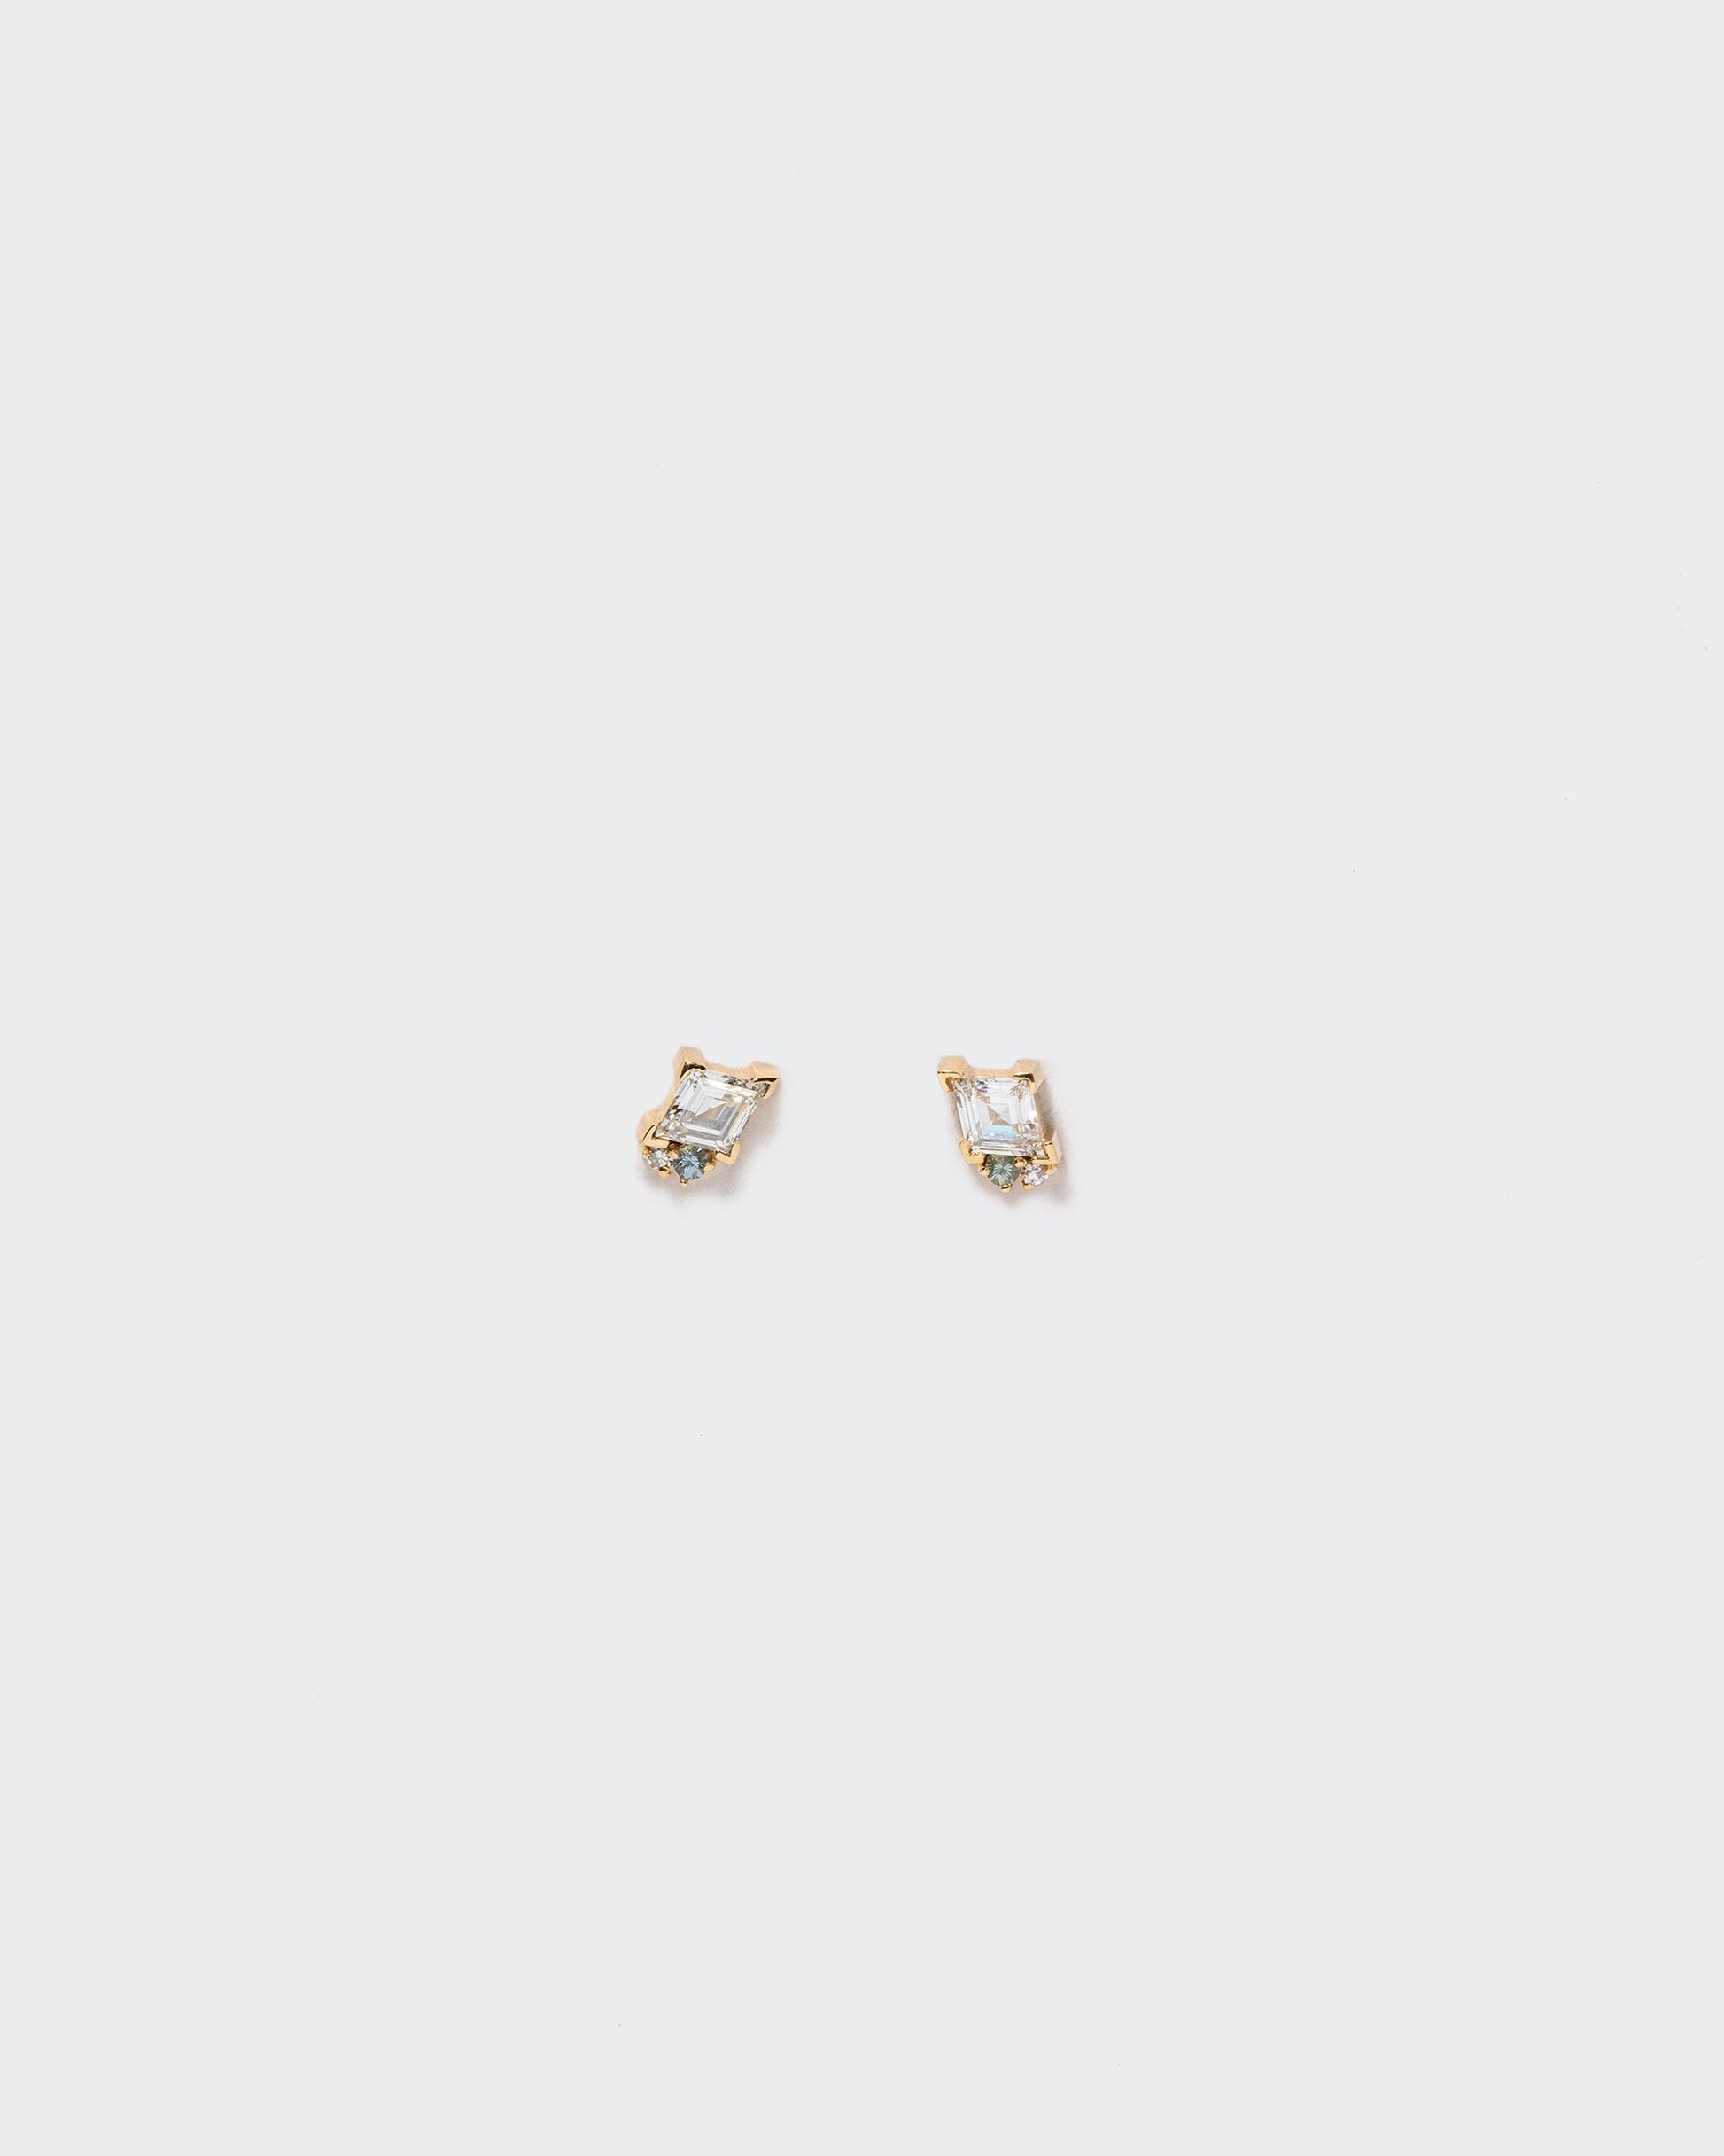  Reciprocating Earrings on light color background.